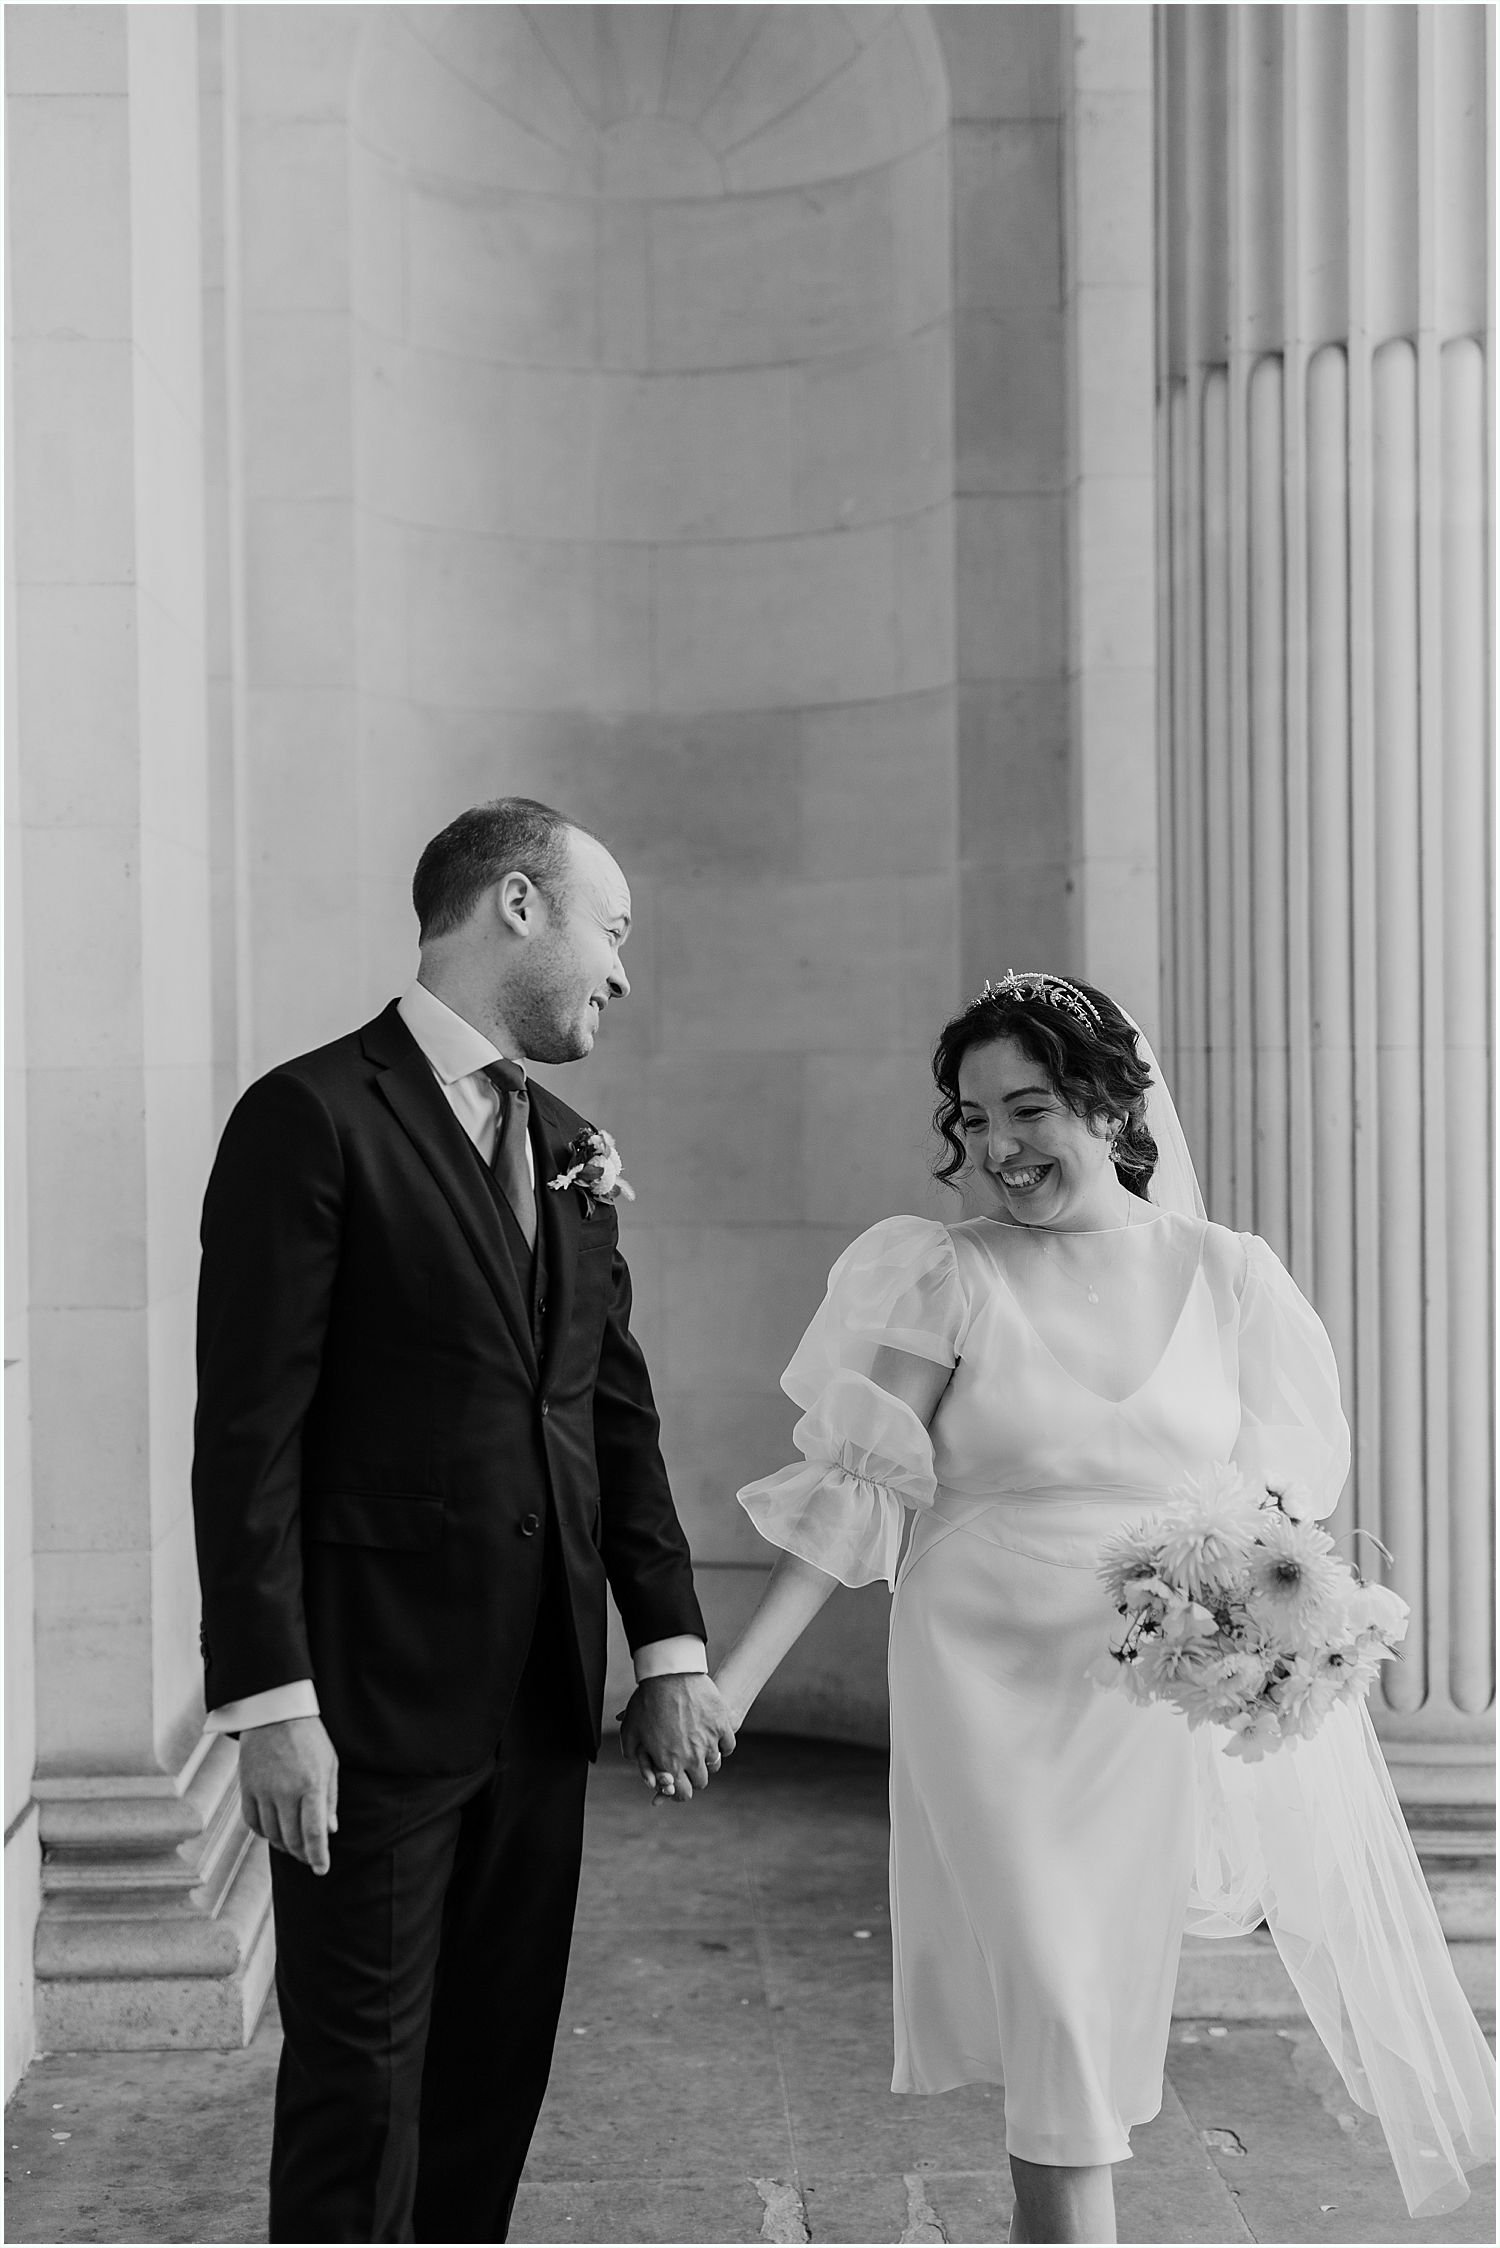 Candid black and white photo of bride and groom at the Old Marylebone Town Hall